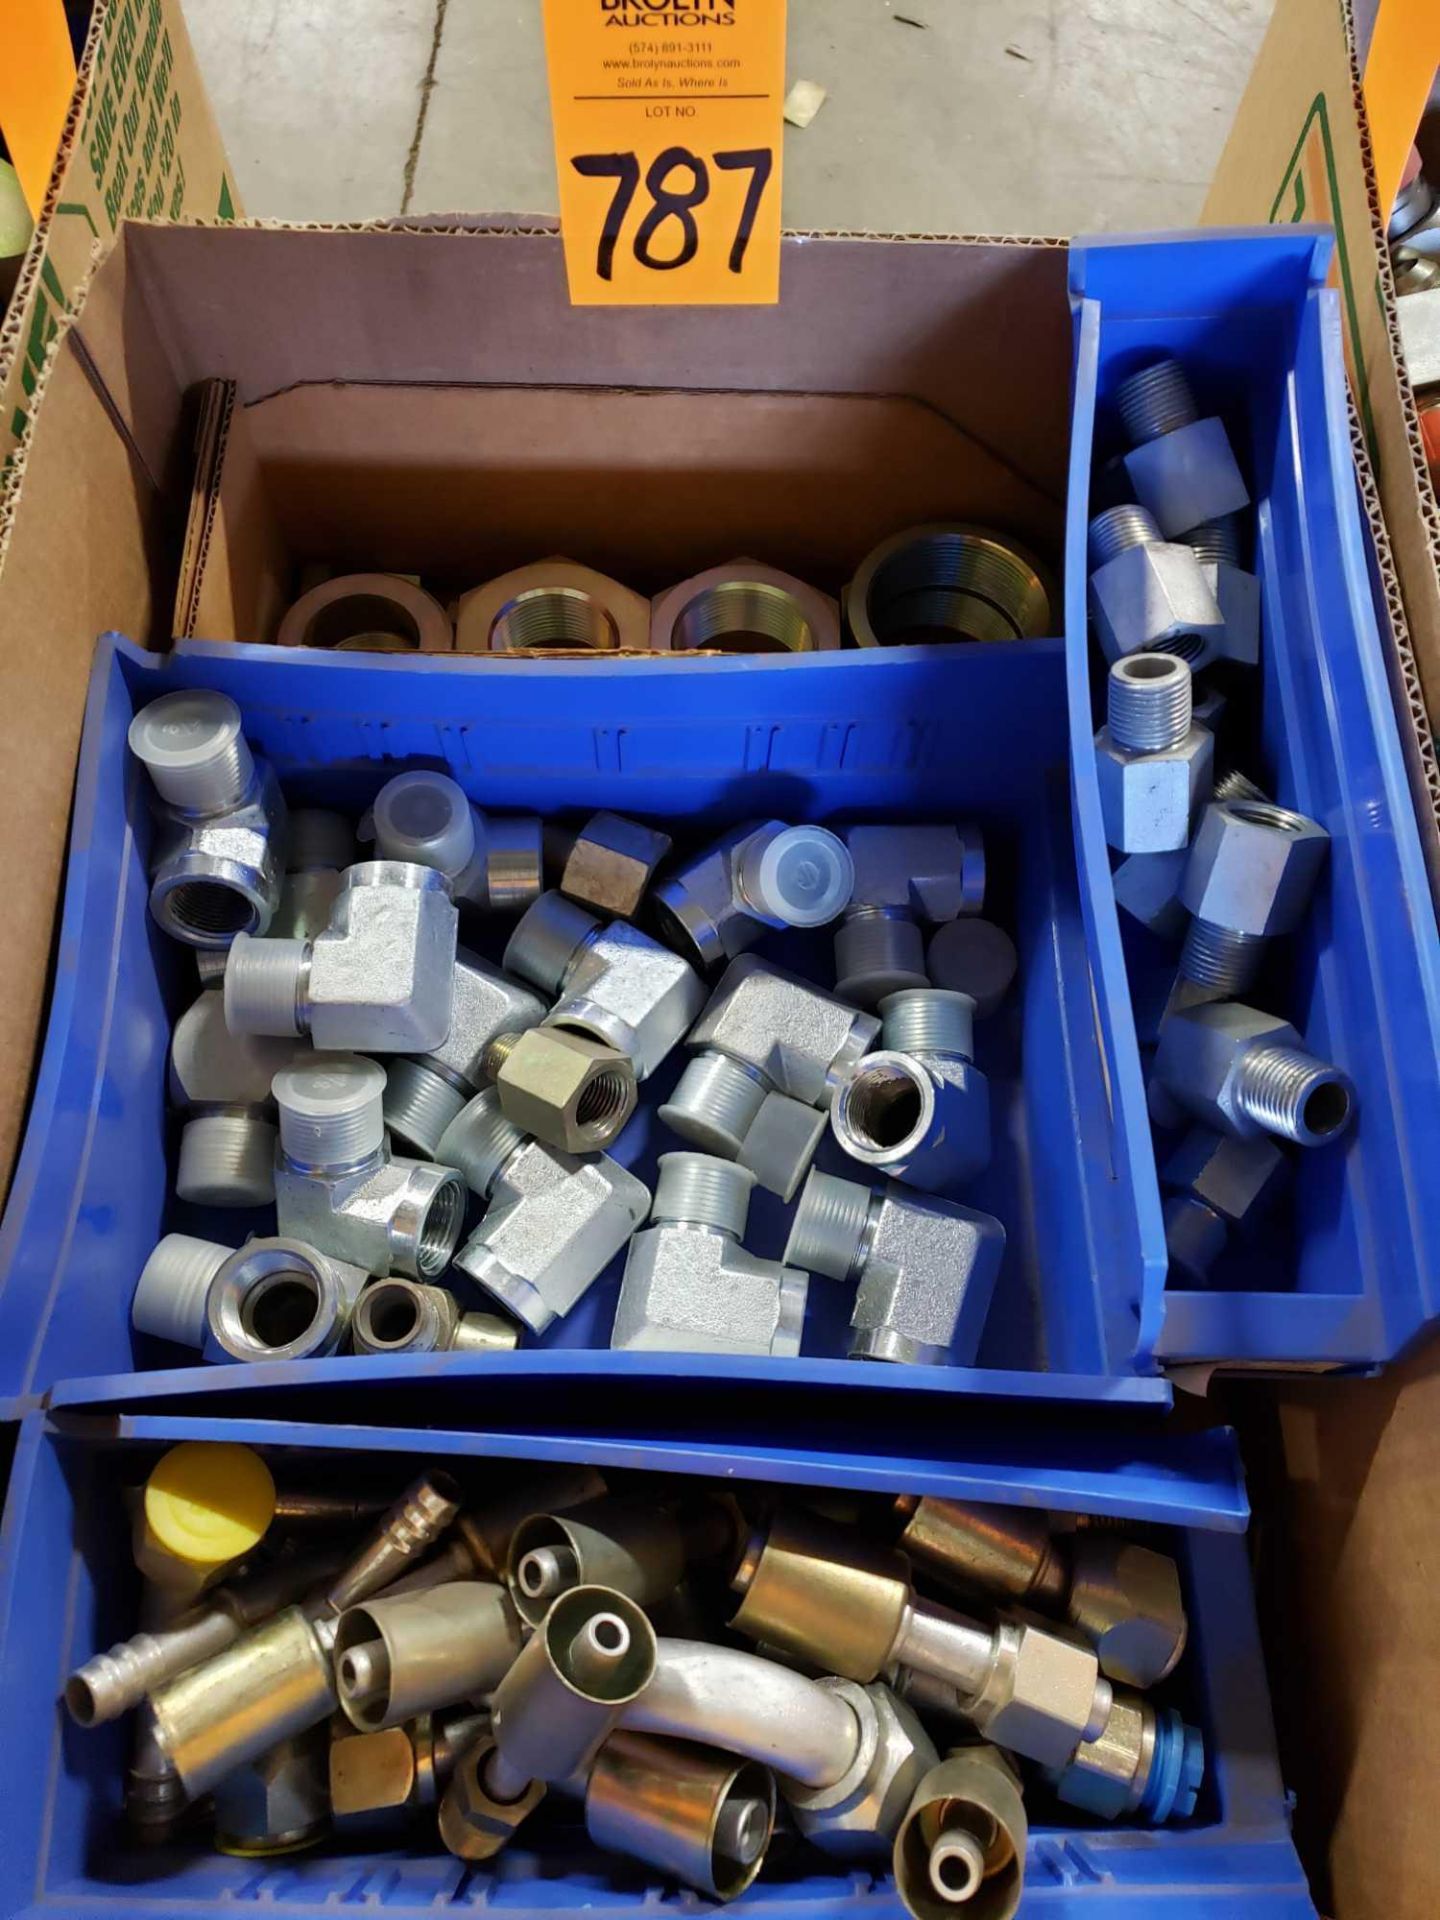 Assorted hydraulic fittings as pictured. New.